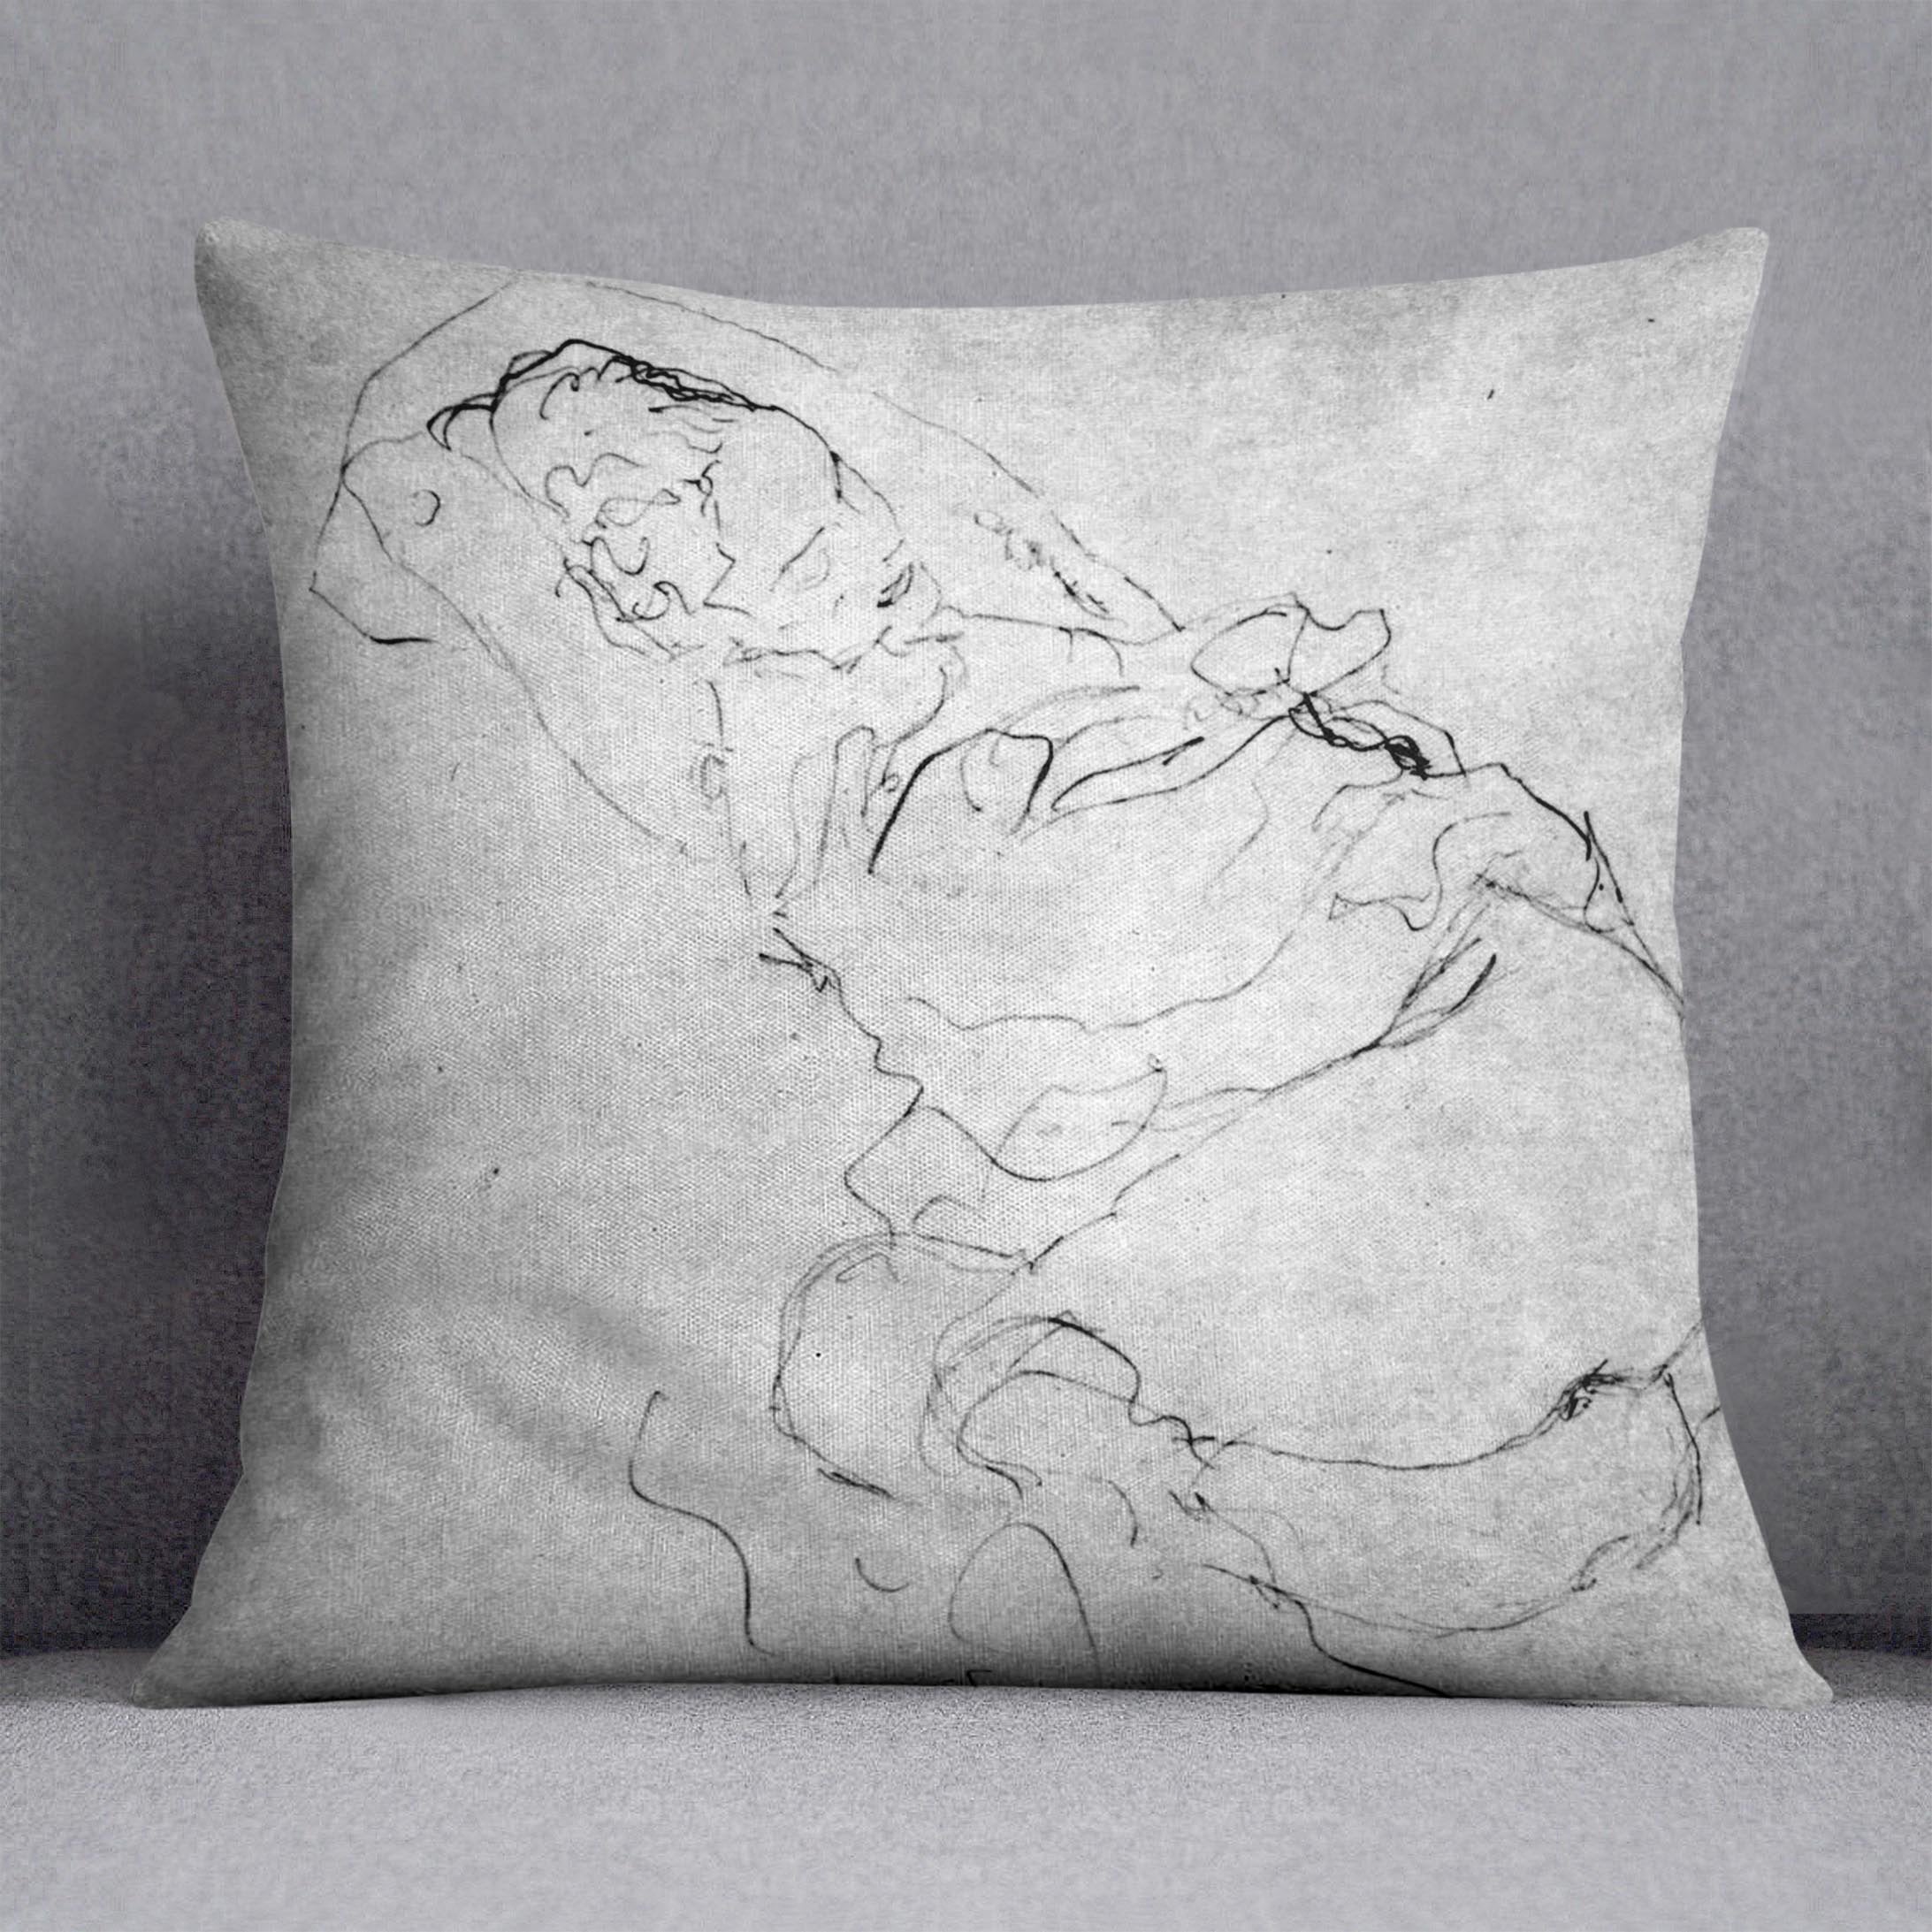 Liegender female over the head with entangled arms by Klimt Throw Pillow